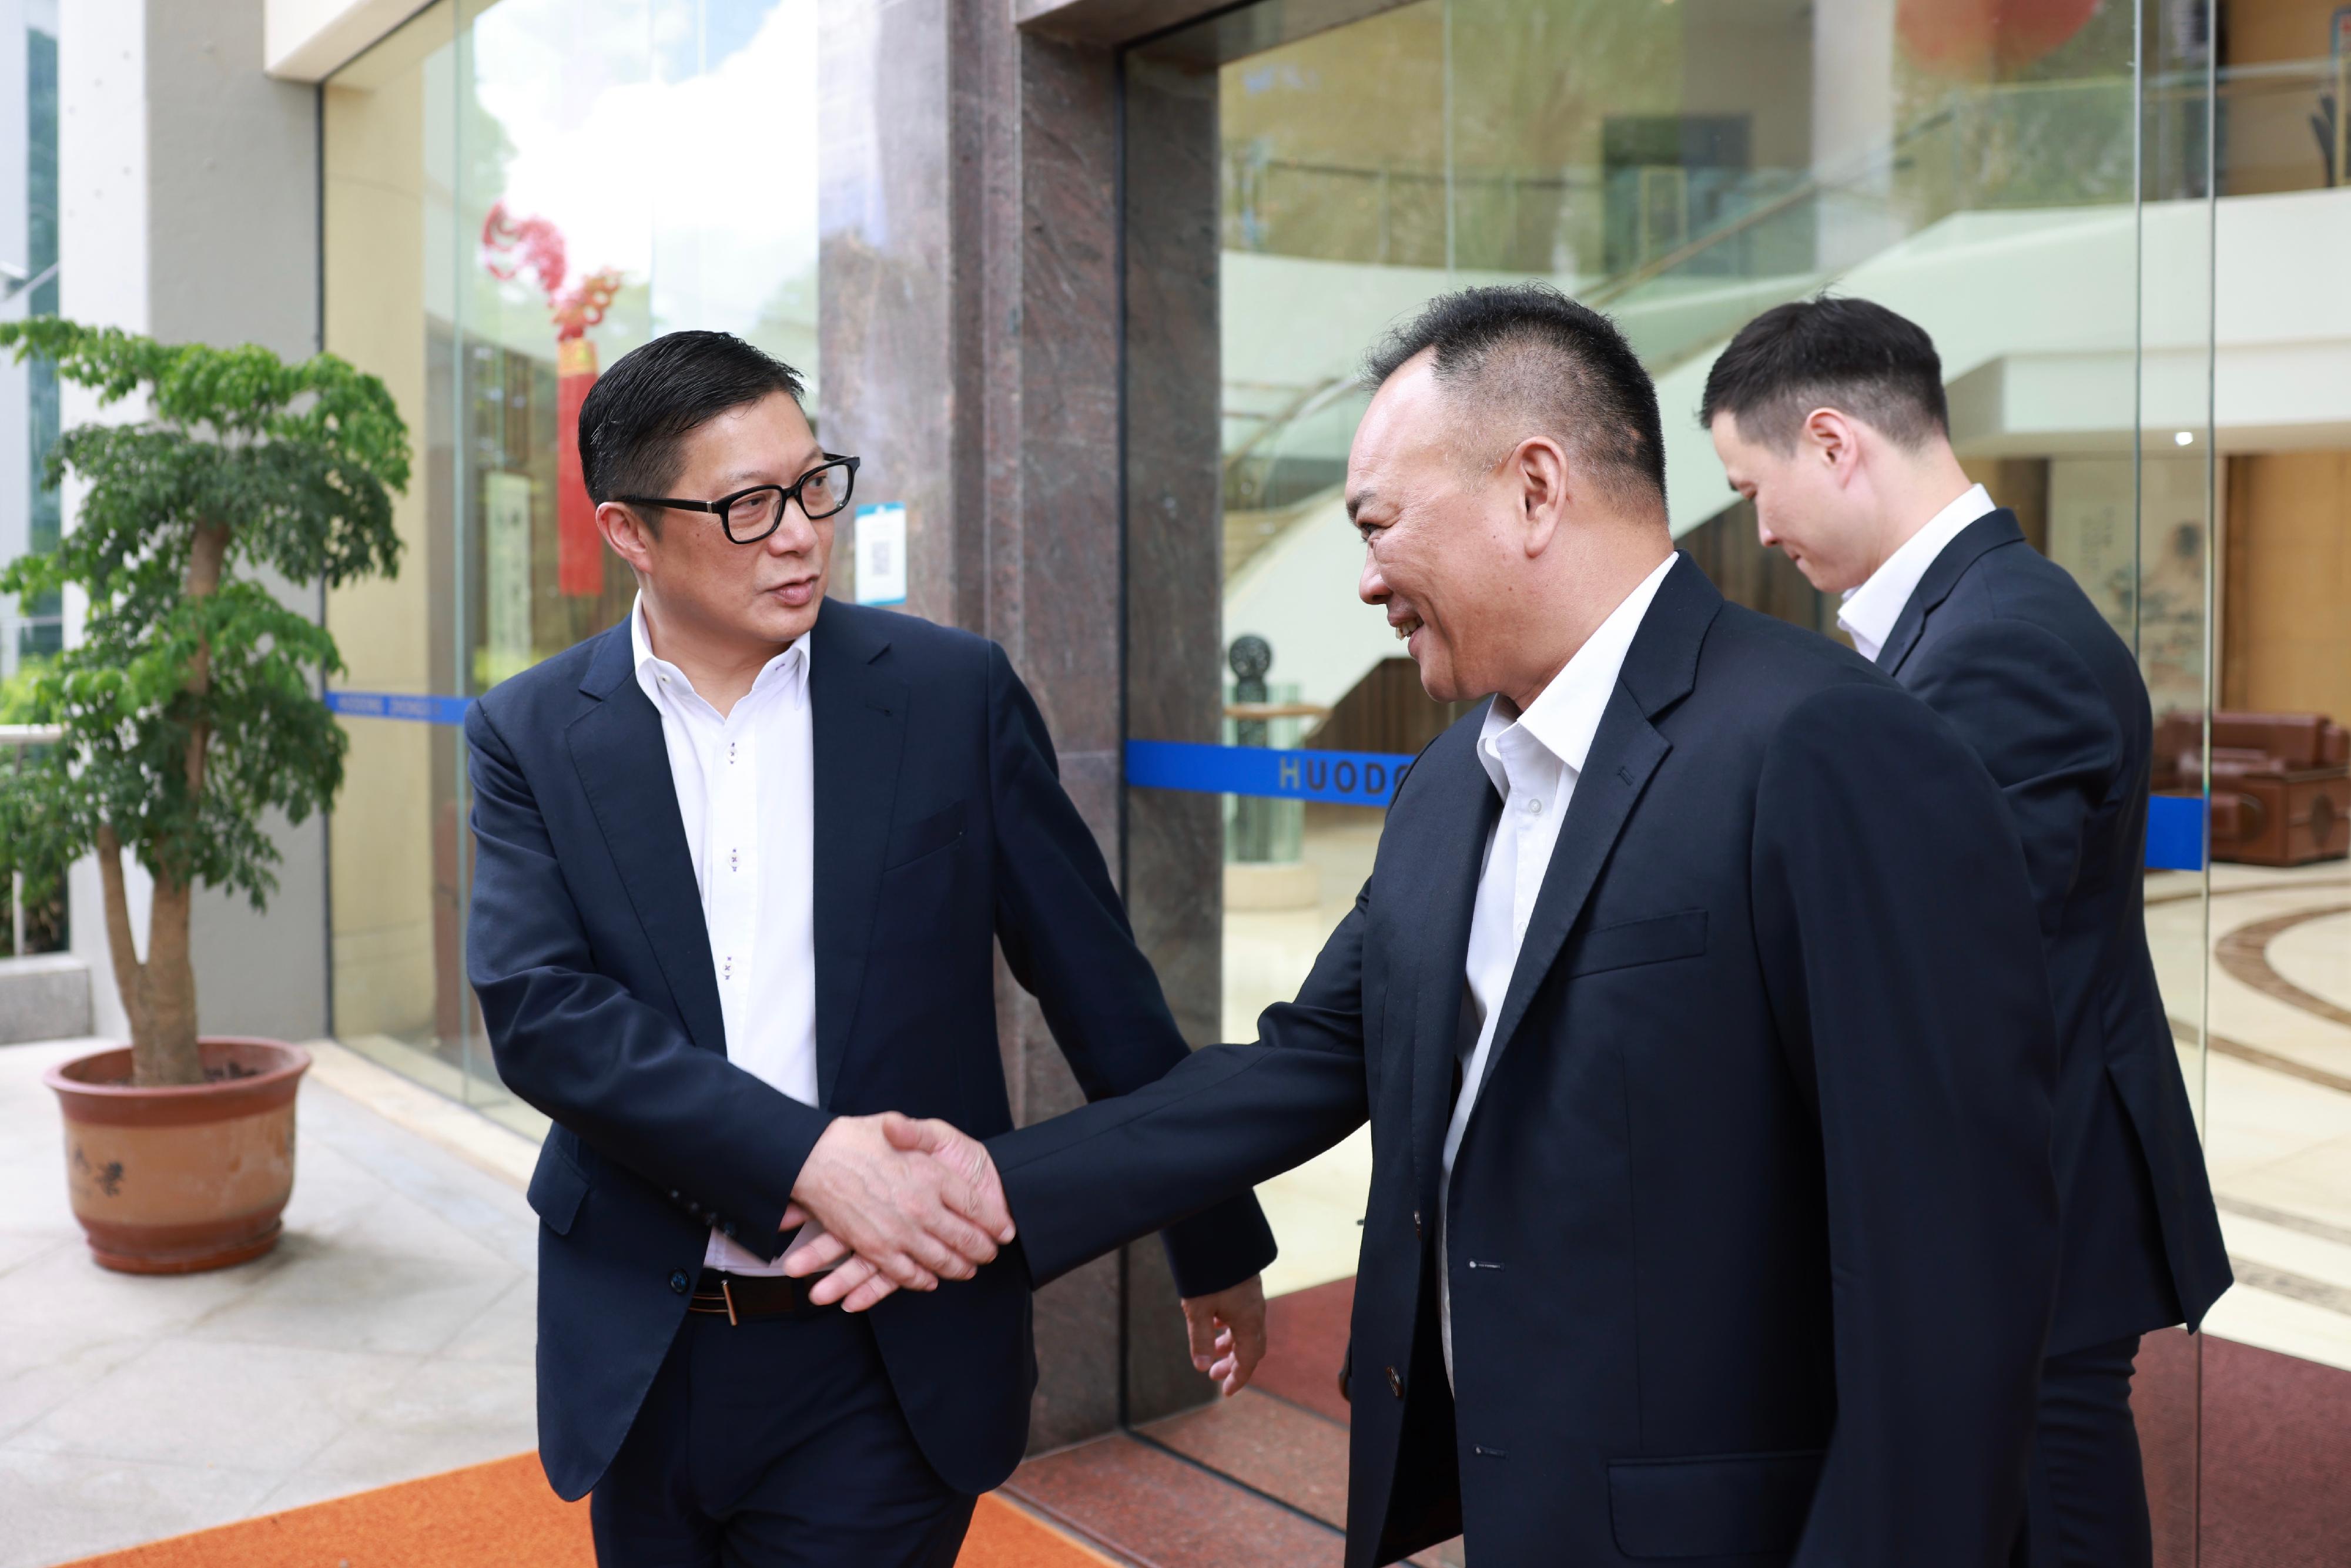 The Secretary for Security, Mr Tang Ping-keung, visited Zhuhai and Jiangmen today (June 21) to continue his visit to the Guangdong-Hong Kong-Macao Greater Bay Area. Photo shows Mr Tang (left) calling on Vice Mayor of Zhuhai cum Director-General of the Zhuhai Municipal Public Security Bureau, Mr Xie Rensi (right).